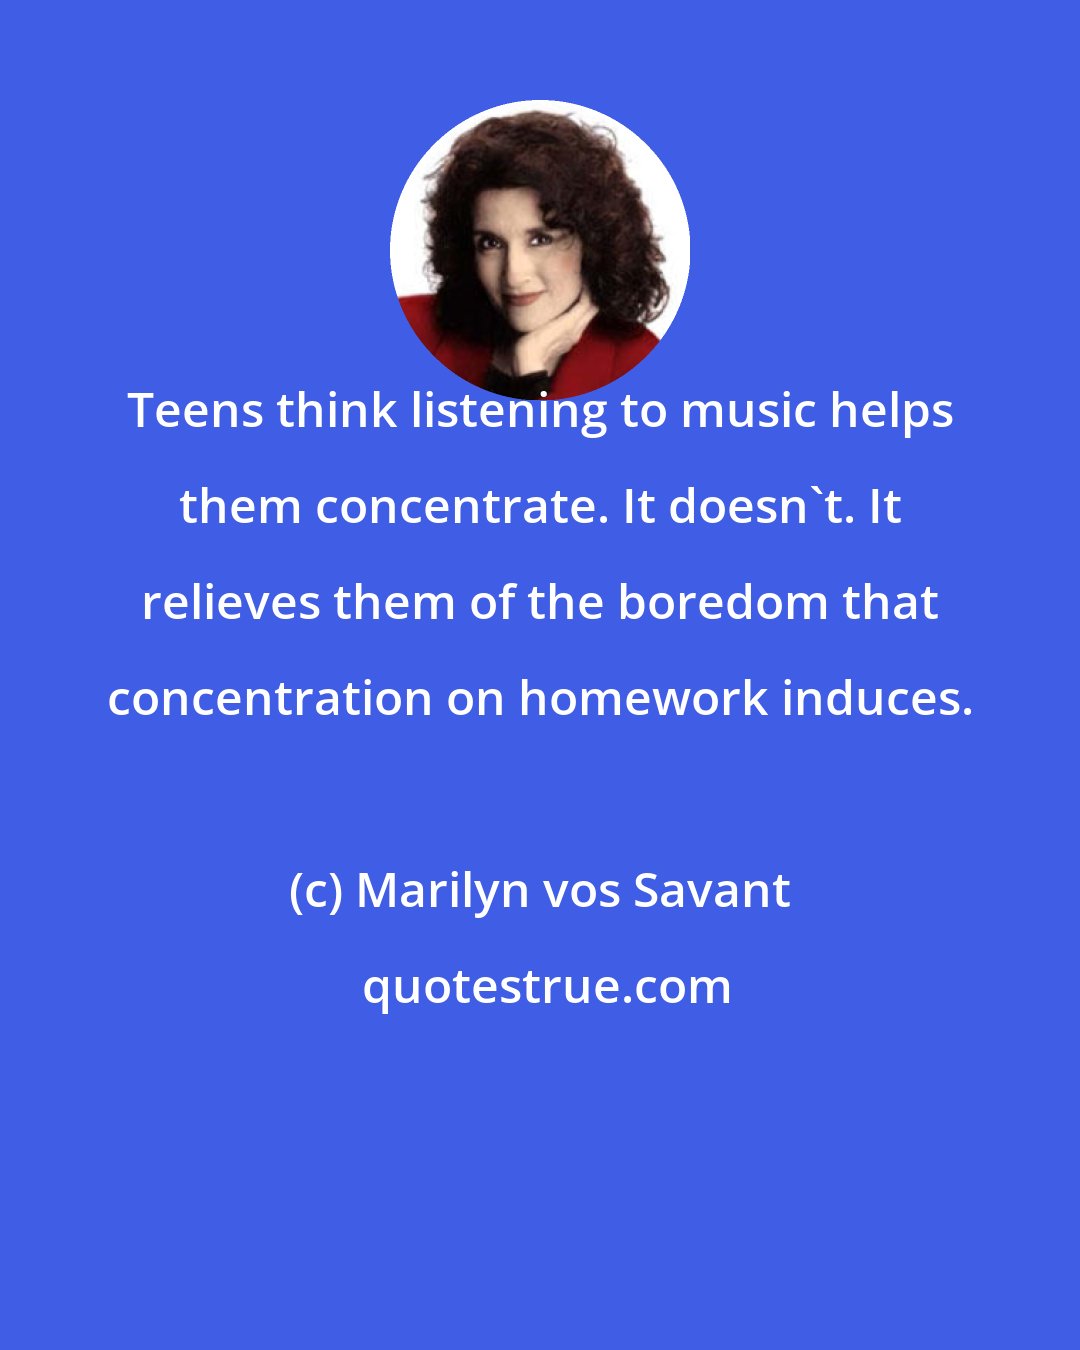 Marilyn vos Savant: Teens think listening to music helps them concentrate. It doesn't. It relieves them of the boredom that concentration on homework induces.